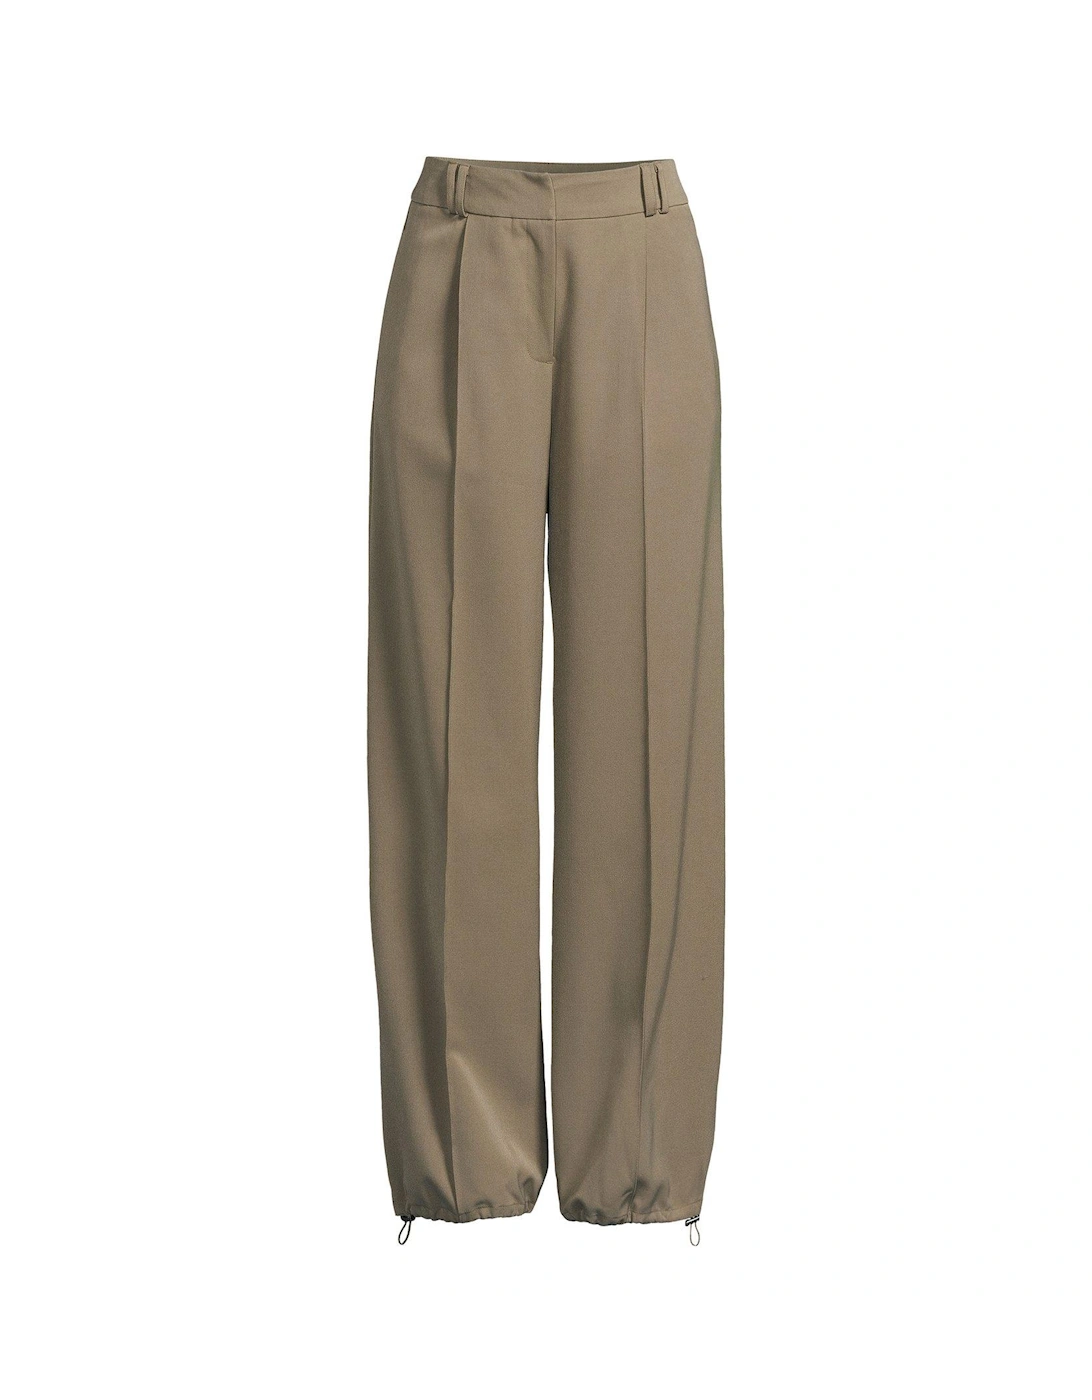 Cuff Detail Trousers - Olive 